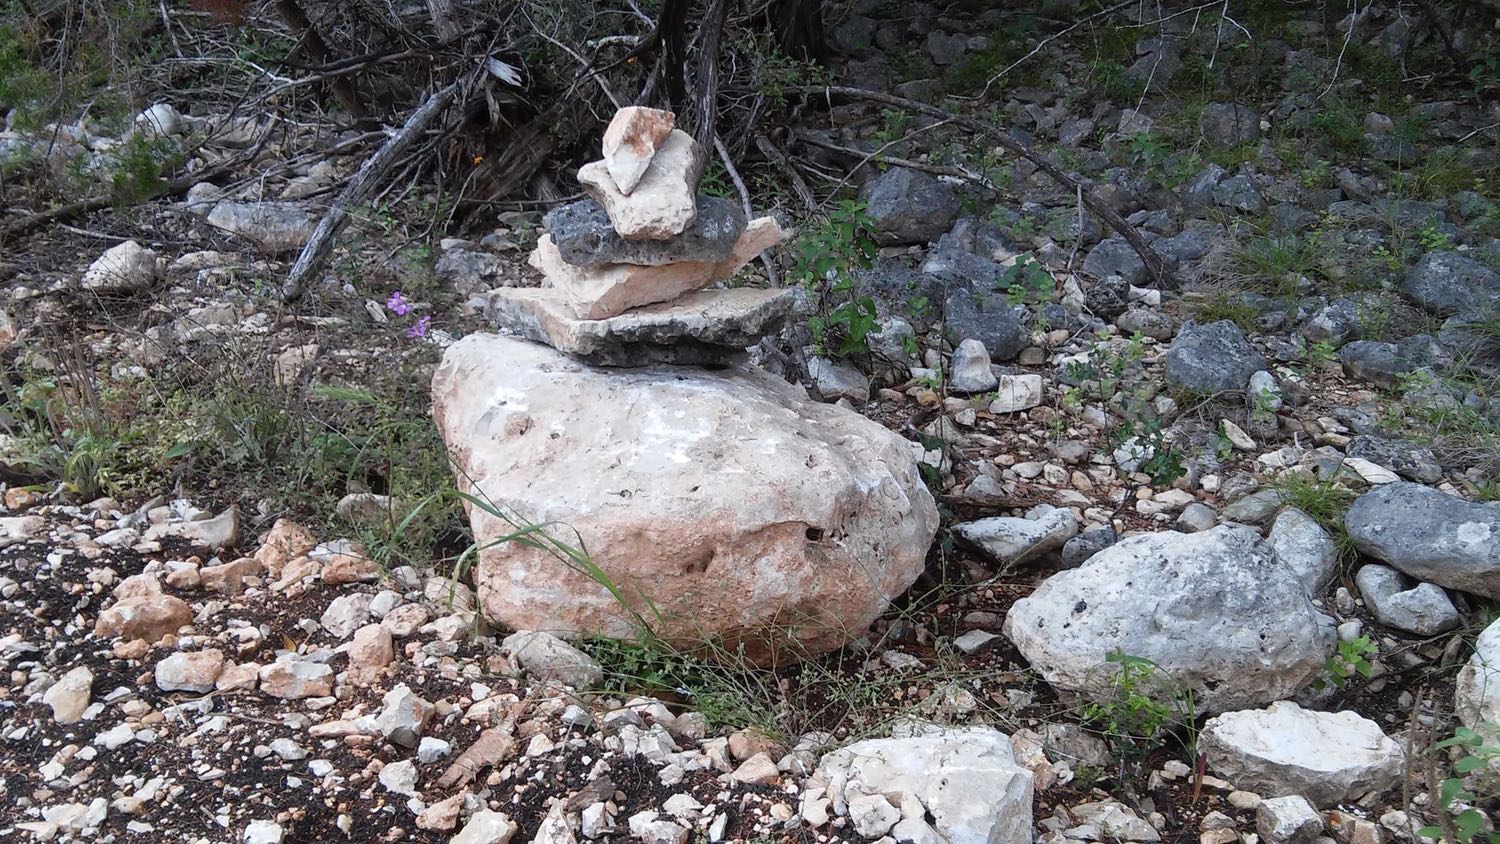 A rock figure appears as standing proud and ready to lecture